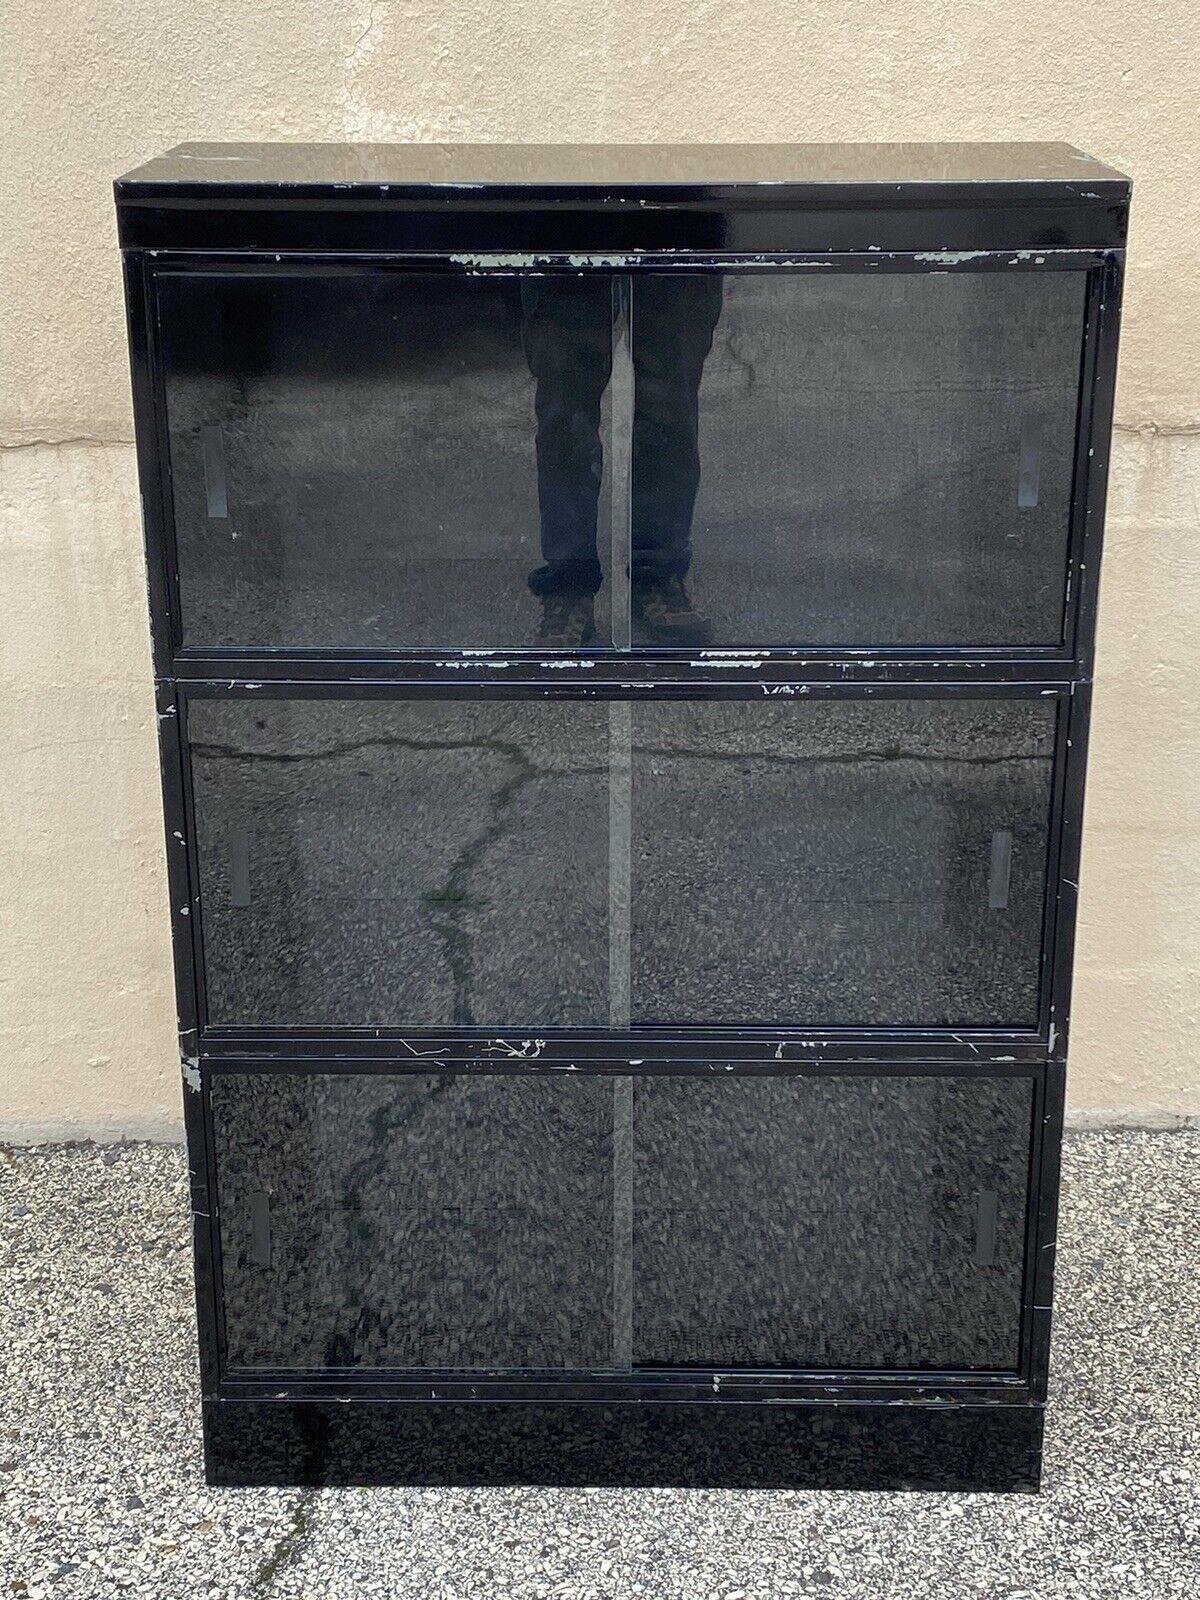 Vintage Globe Wernicke Steel Metal Glass Sliding Door 3 Section Stacking Barrister Lawyers Bookcase. Circa Late 20th Century.
Measurements: 50.5